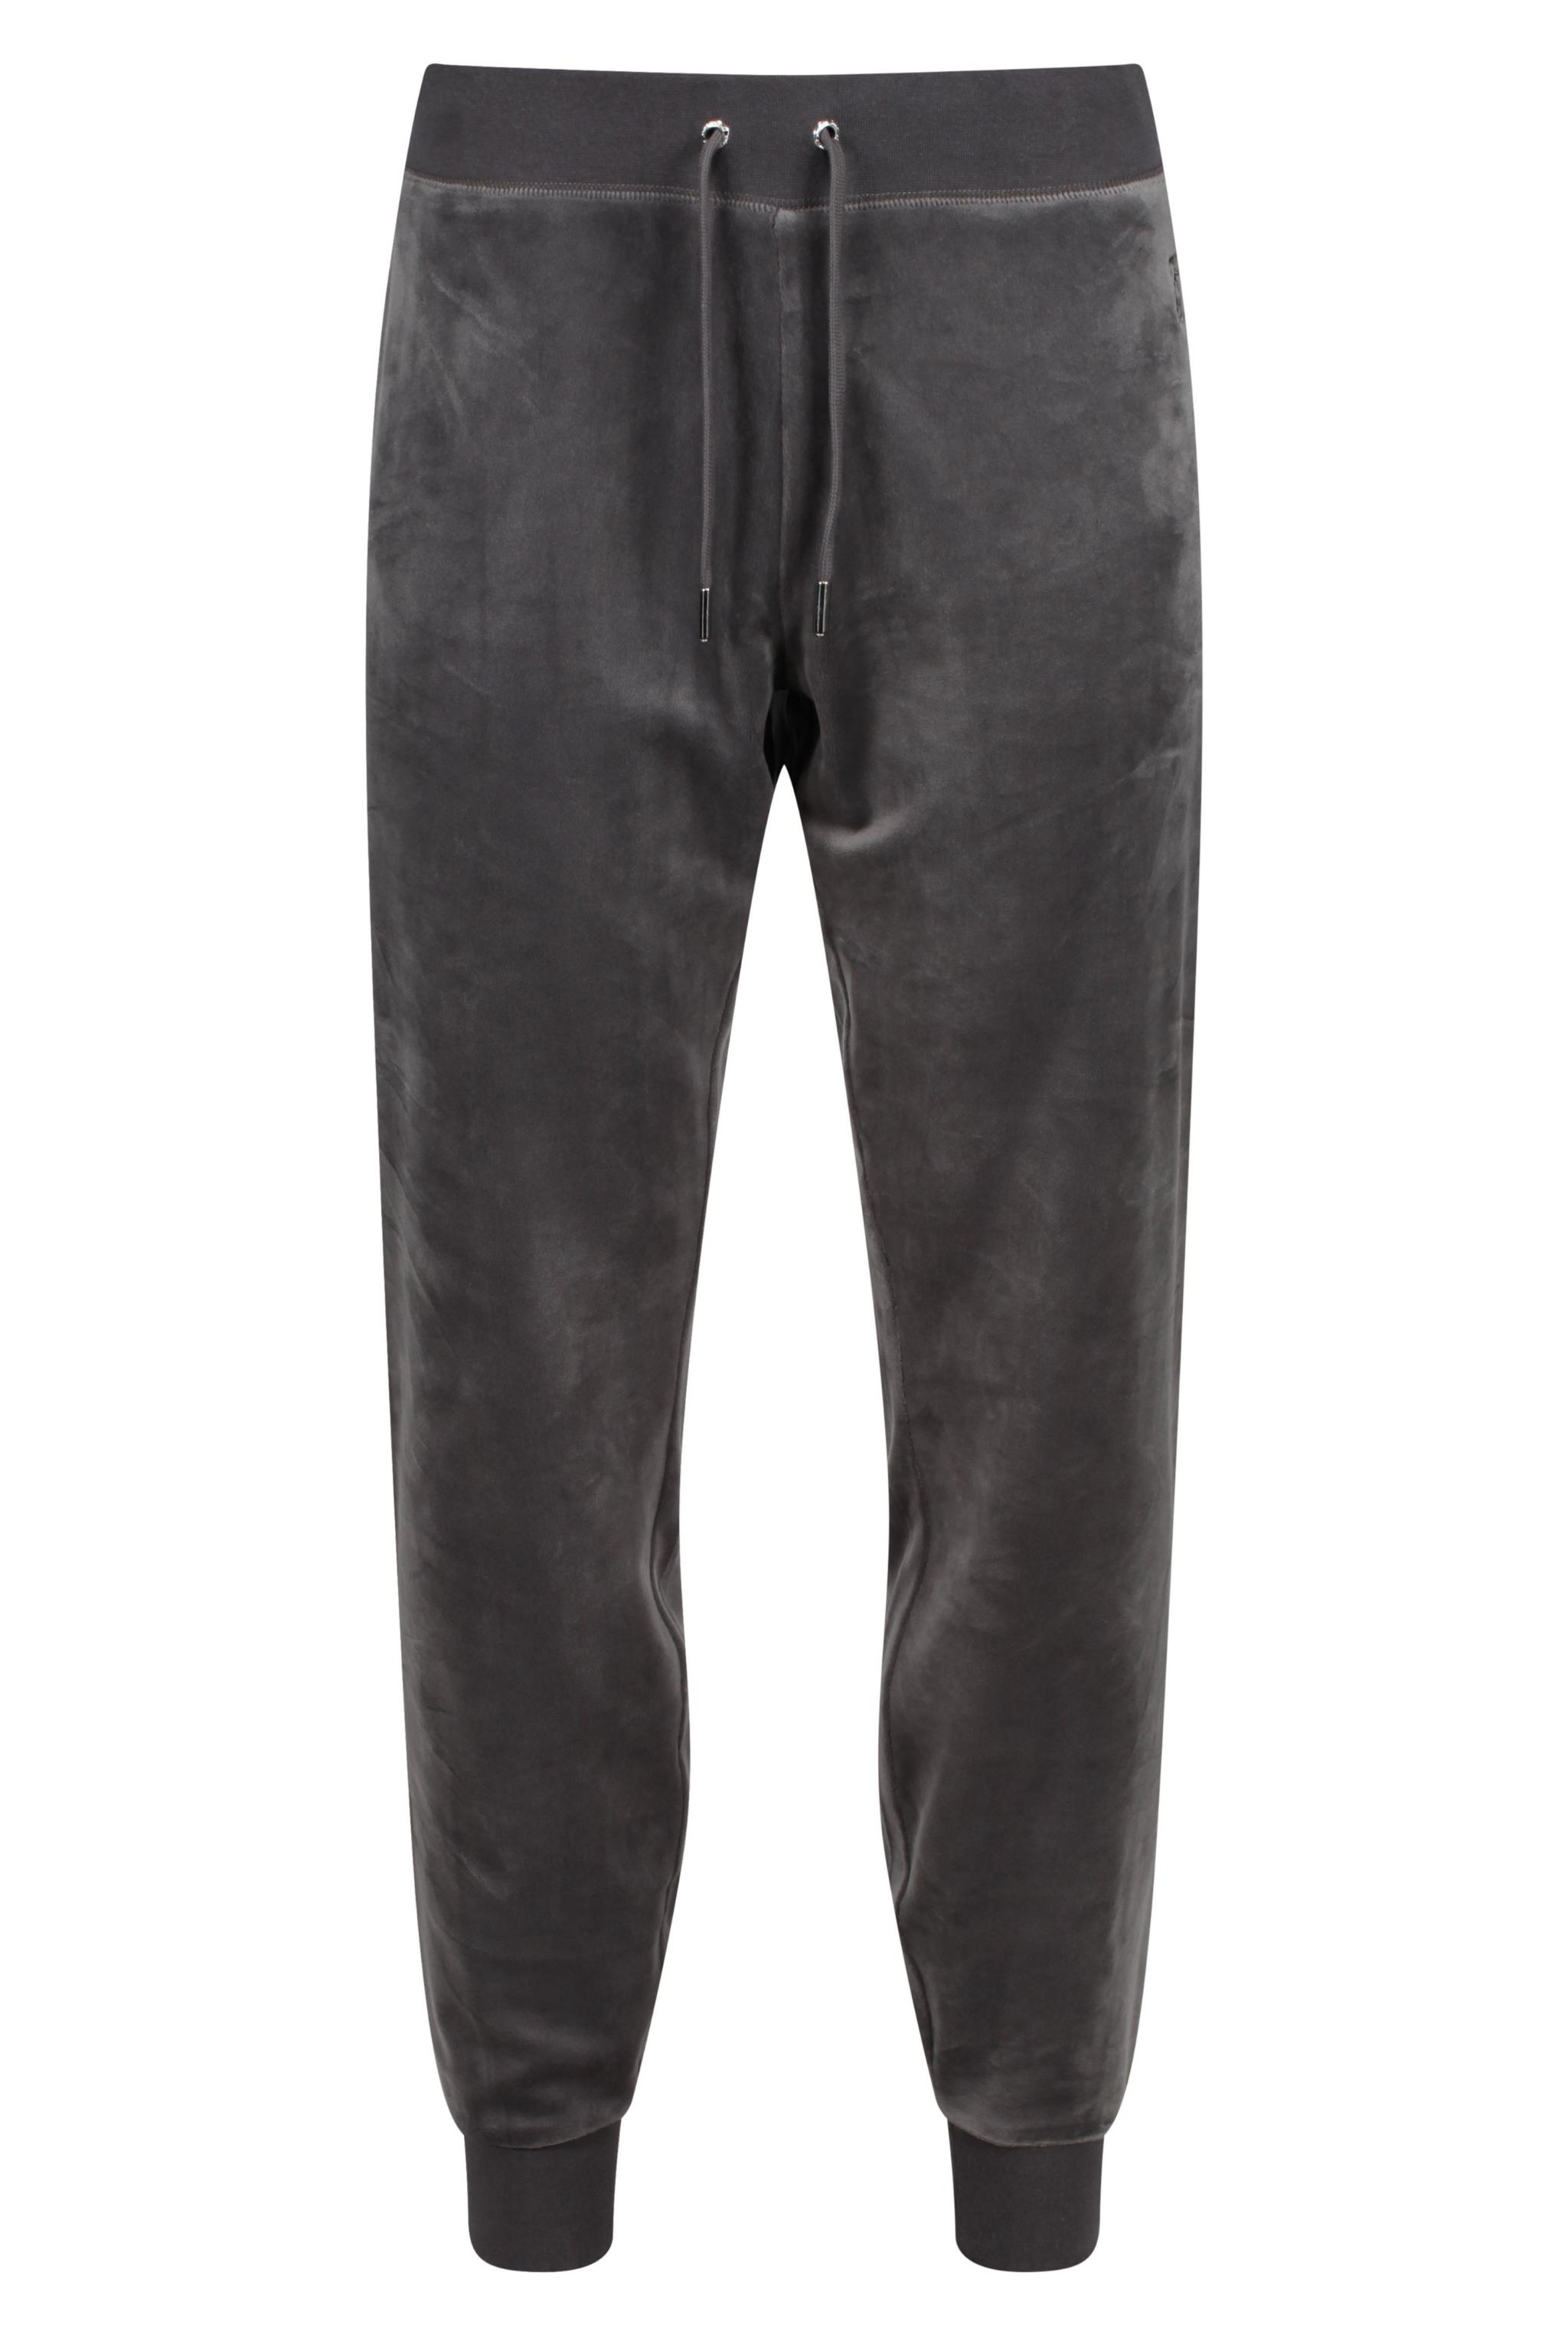 Juicy Couture Top Hat Classic Velour Cuffed JOGGER in Grey | Lyst UK